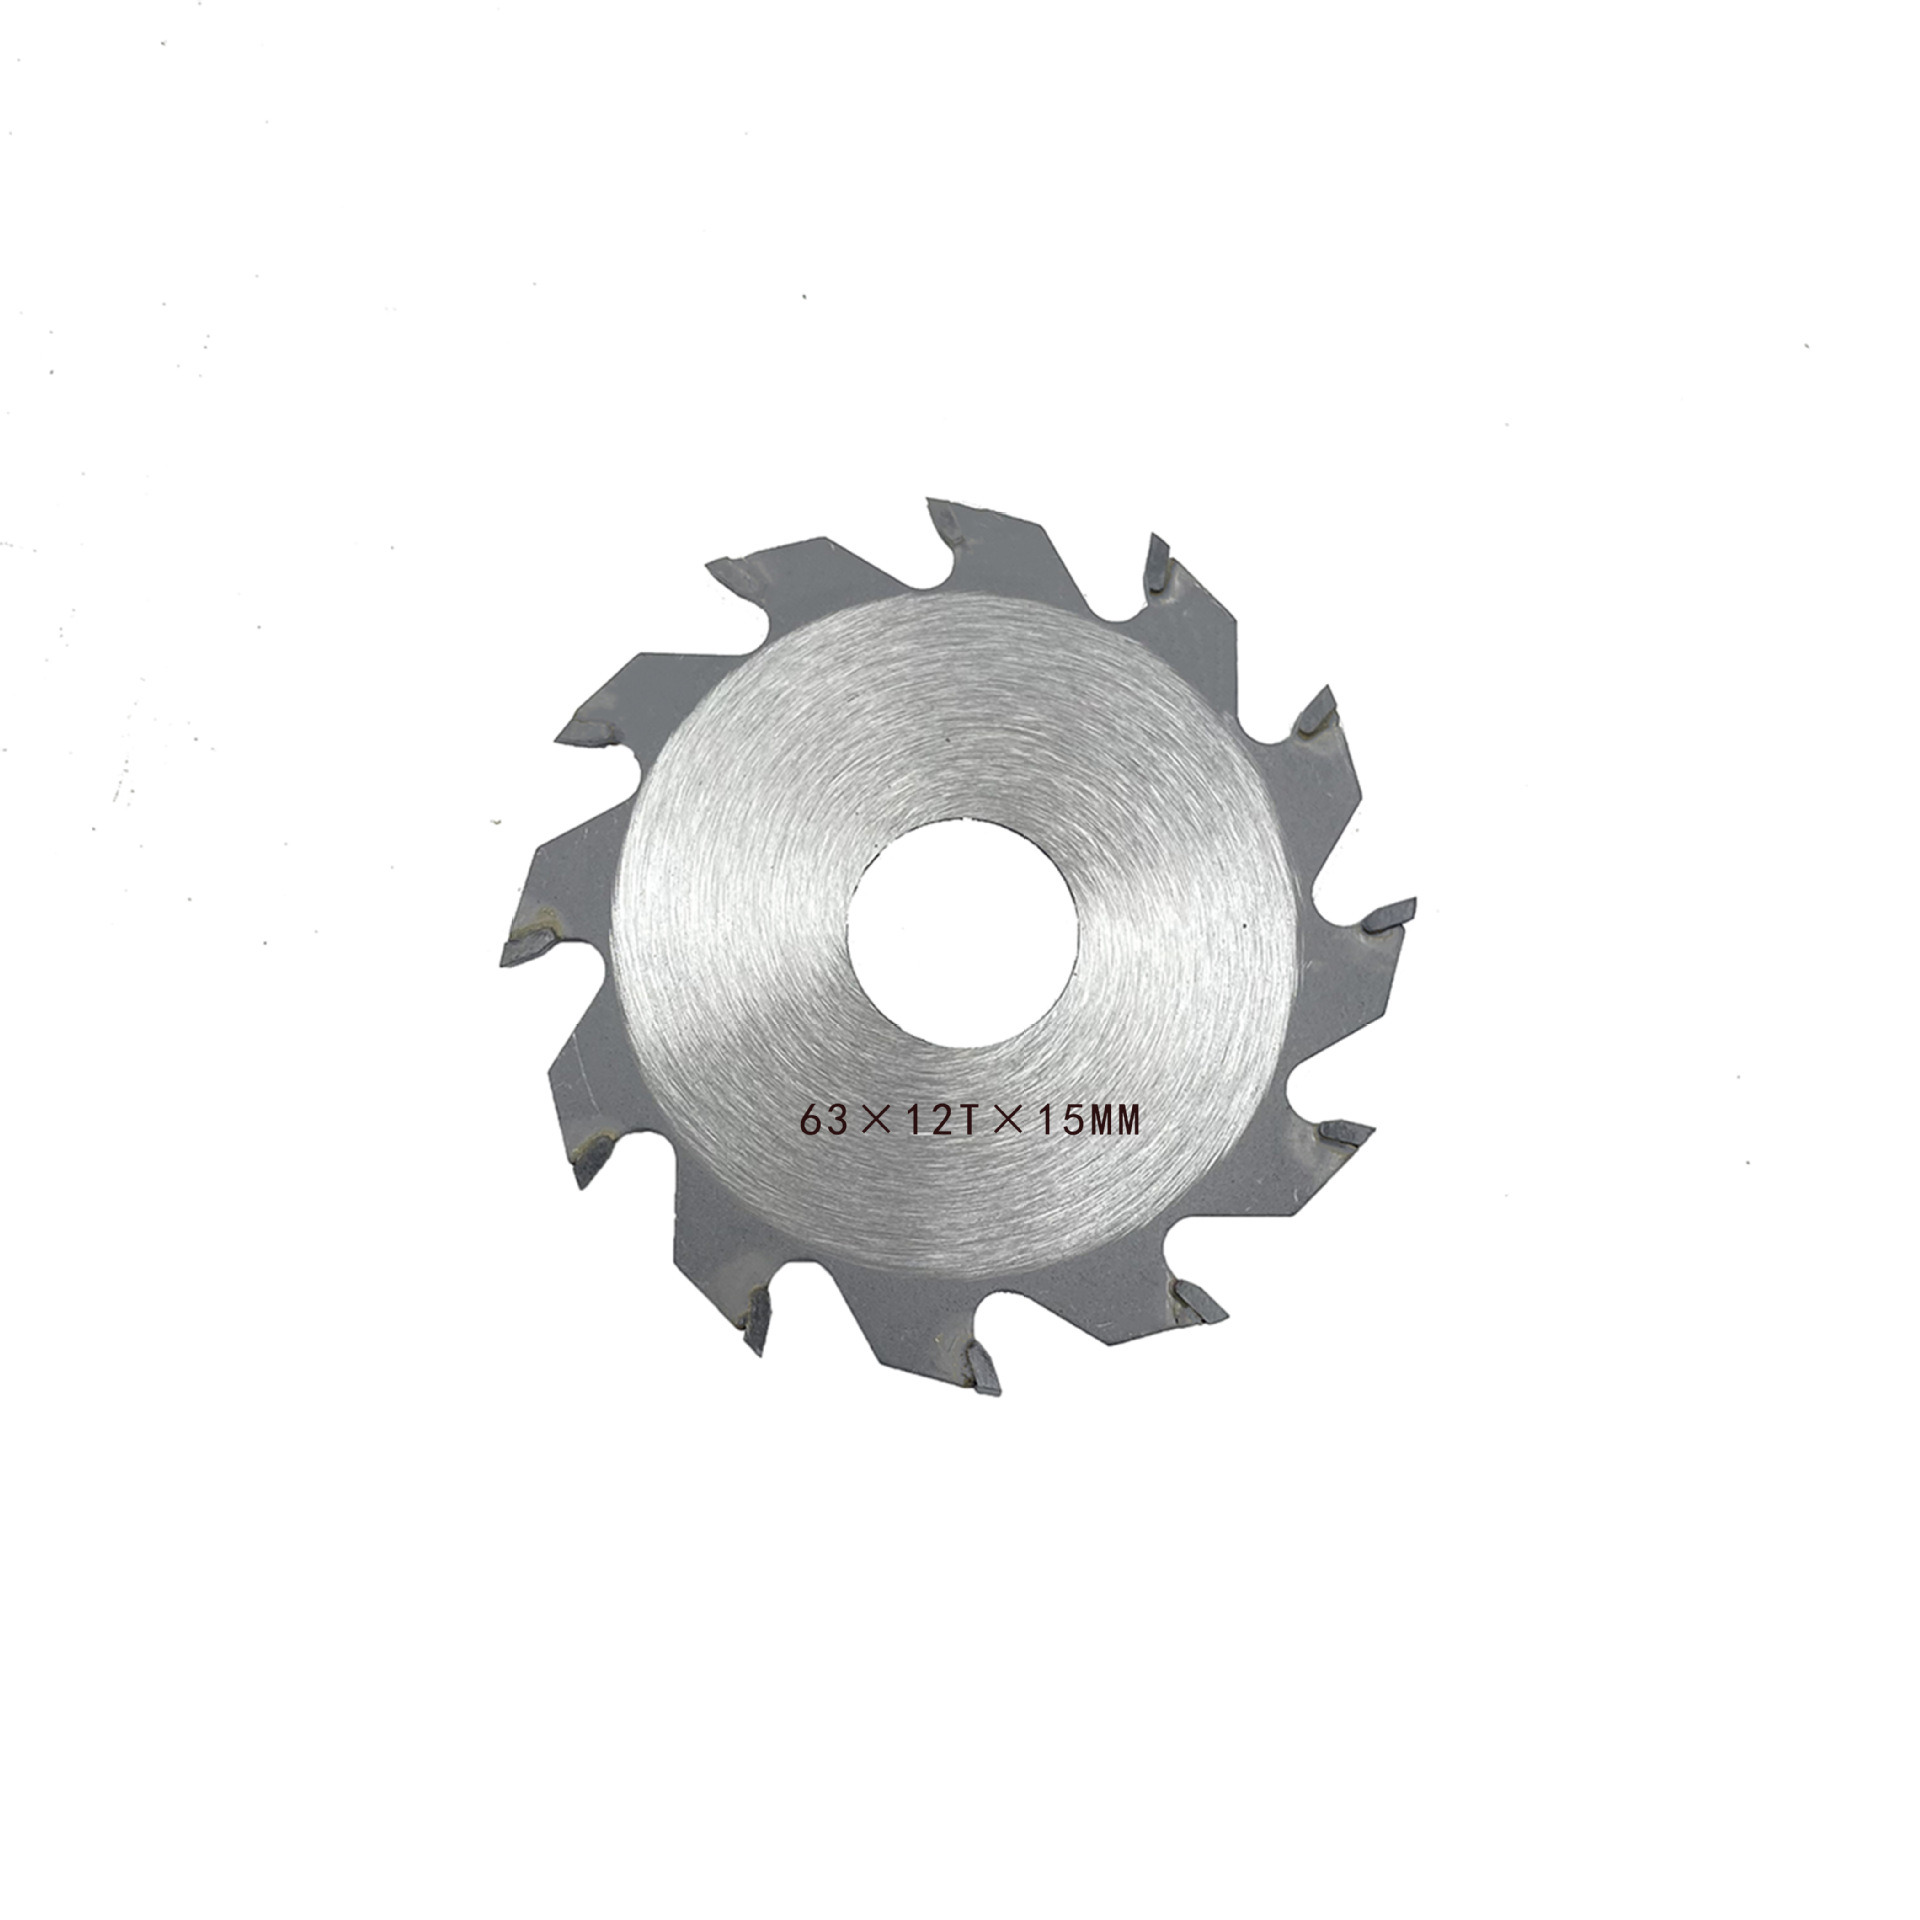 Mini Stainless Steel Saw Blade with Tin-Coated for Wood (SED-MSBT)